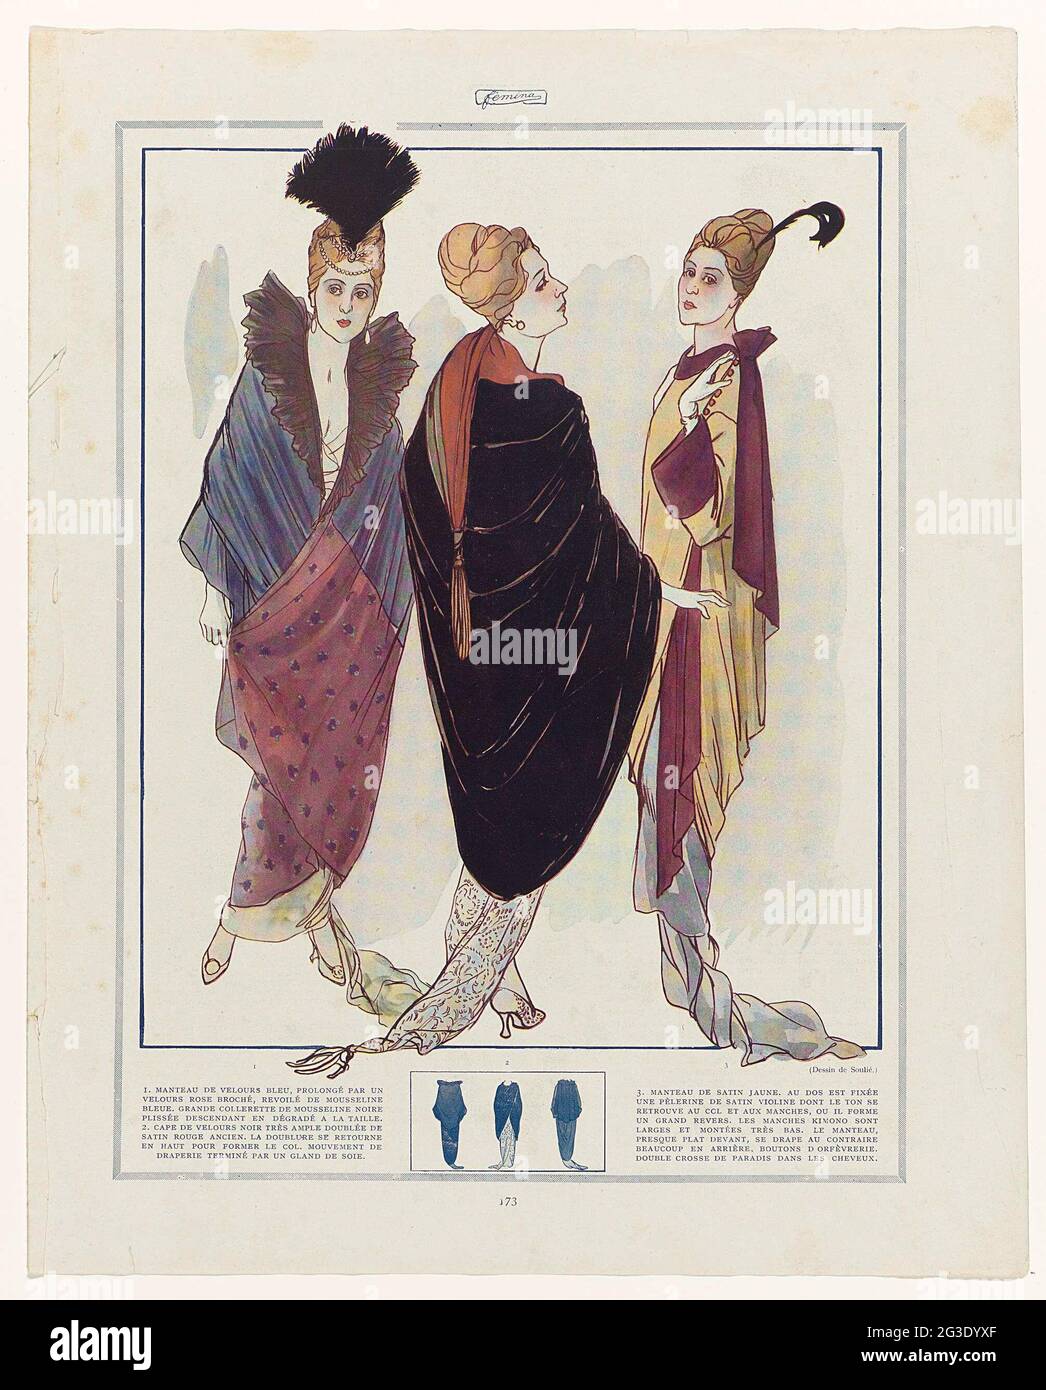 Fémina, ca. 1914, p. 173 and p. 174: 1. Manteau de Velours Bleu (...). Three women in different mantels. 1. Mantle of blue extended with pink bunched velvet. Large collar of